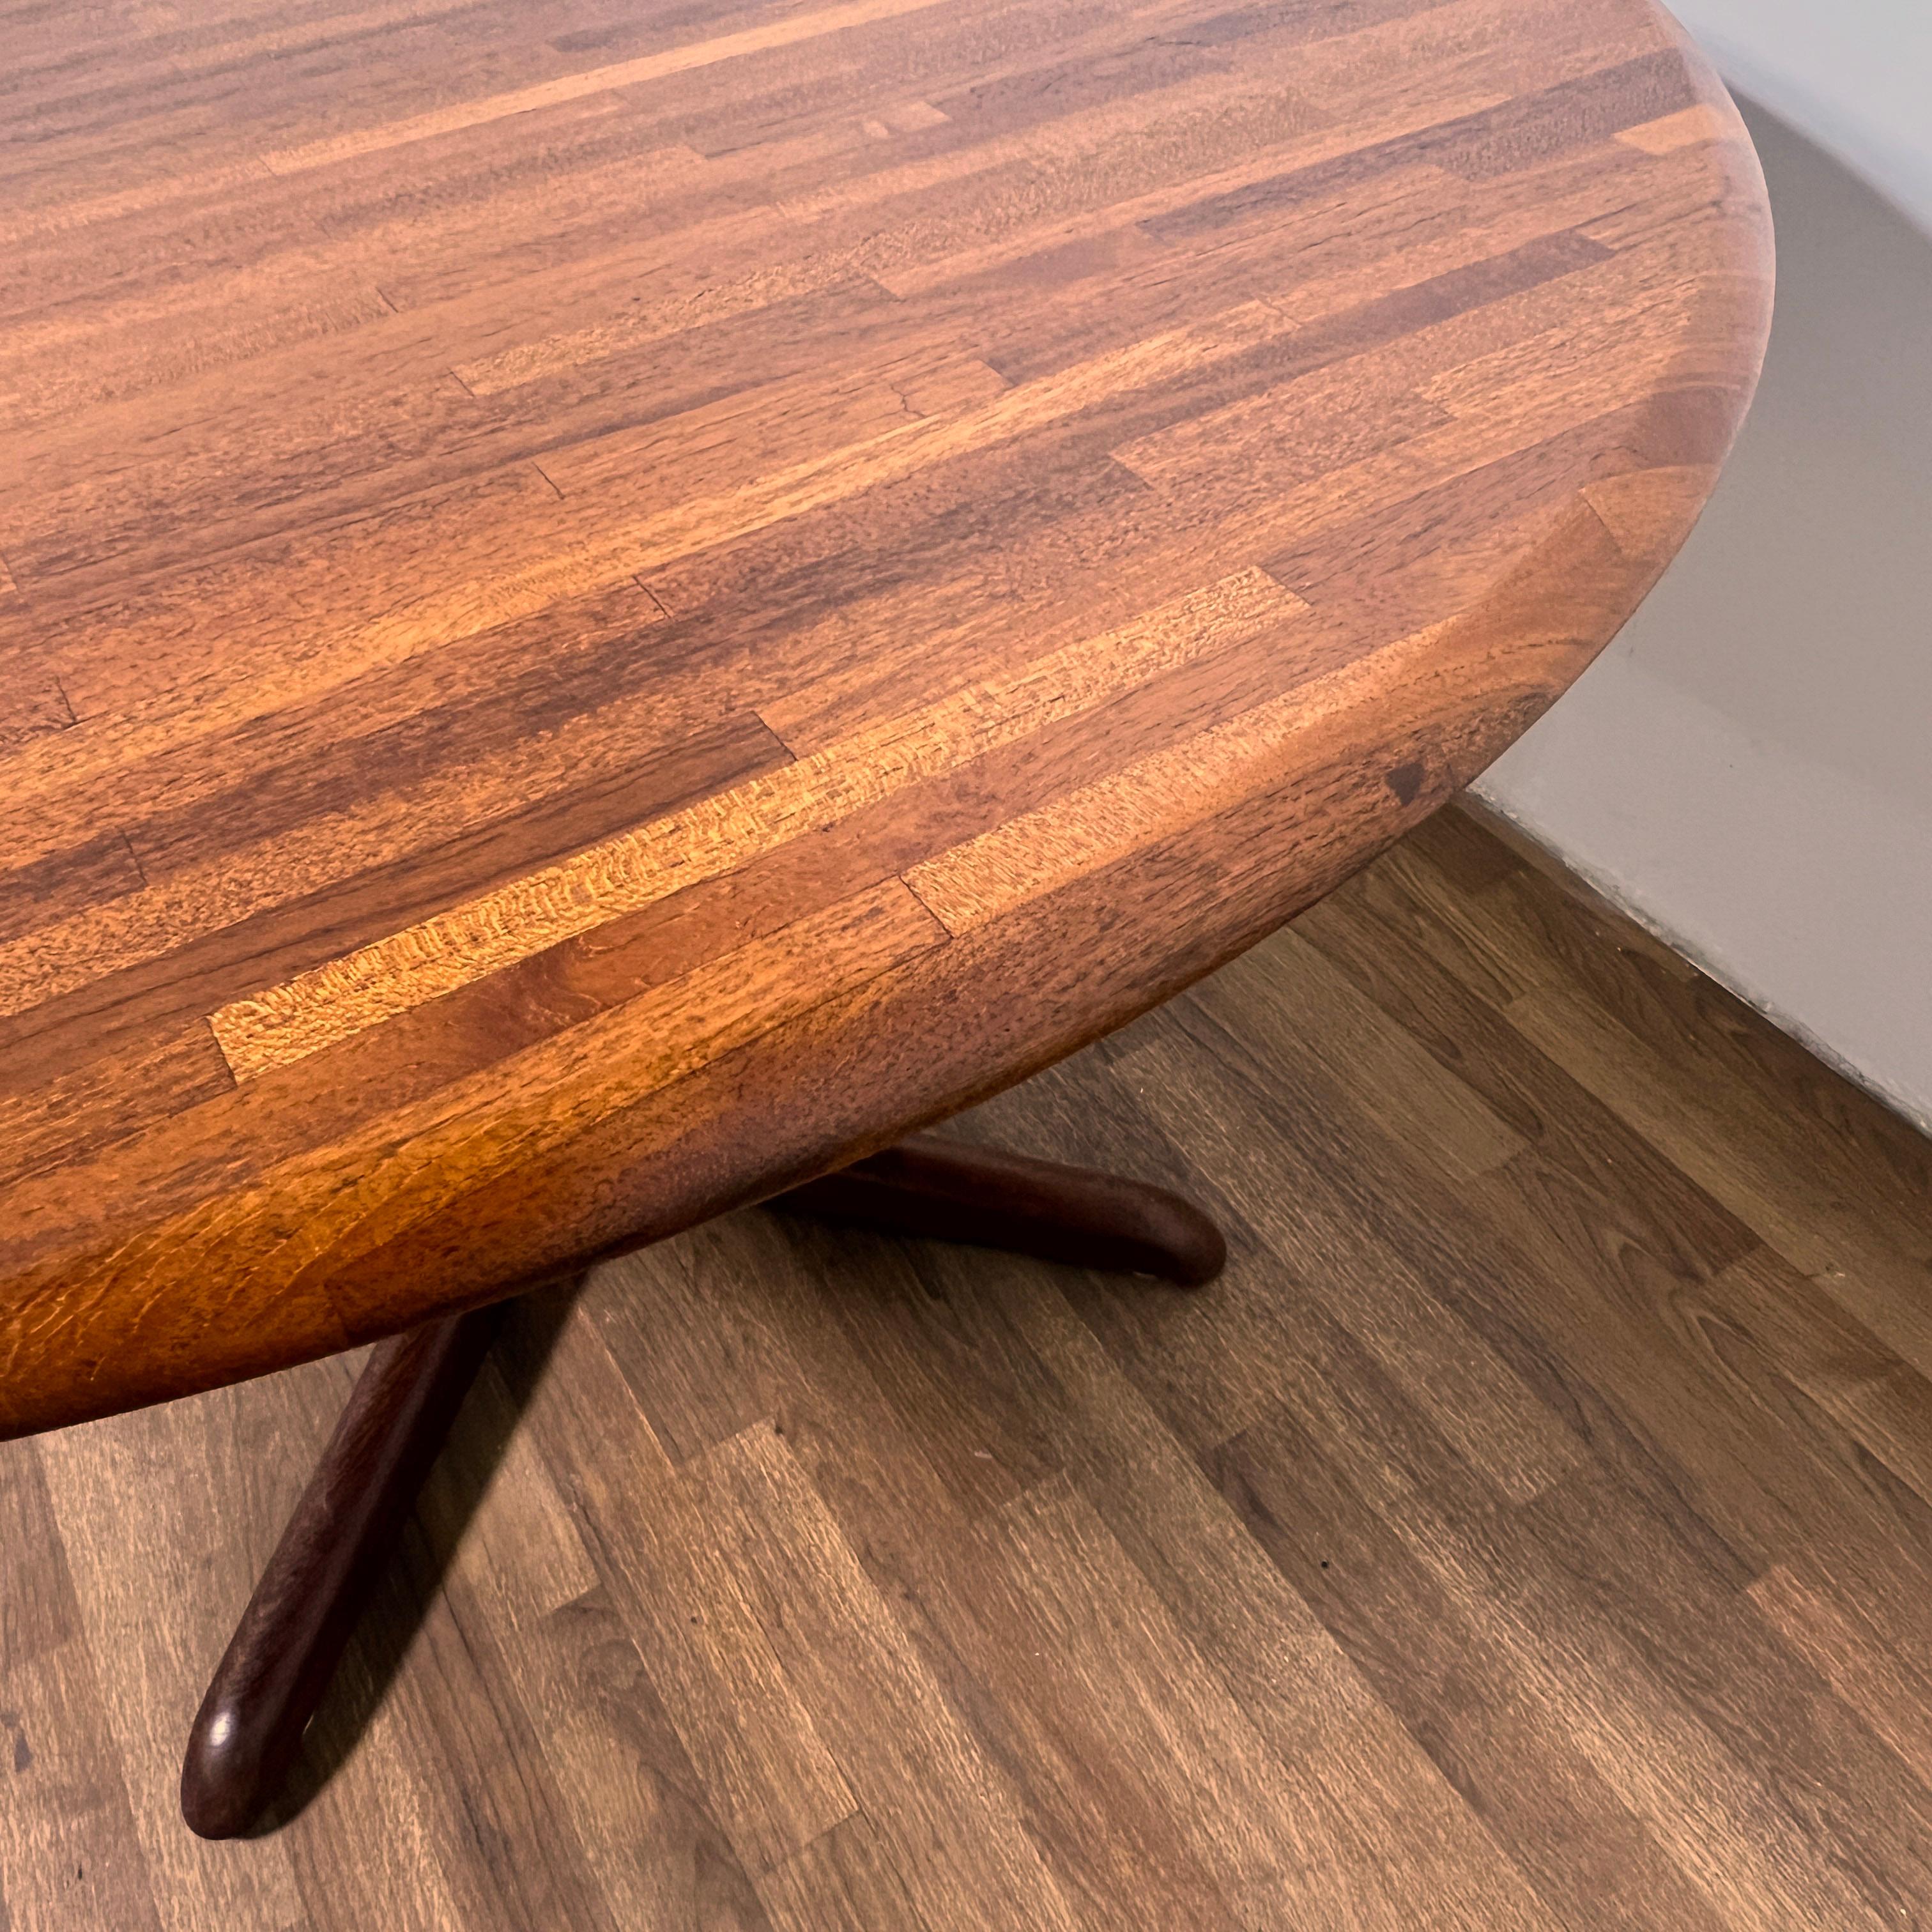 Danish Modern Staved Teak Dining Table Circa 1970s For Sale 1